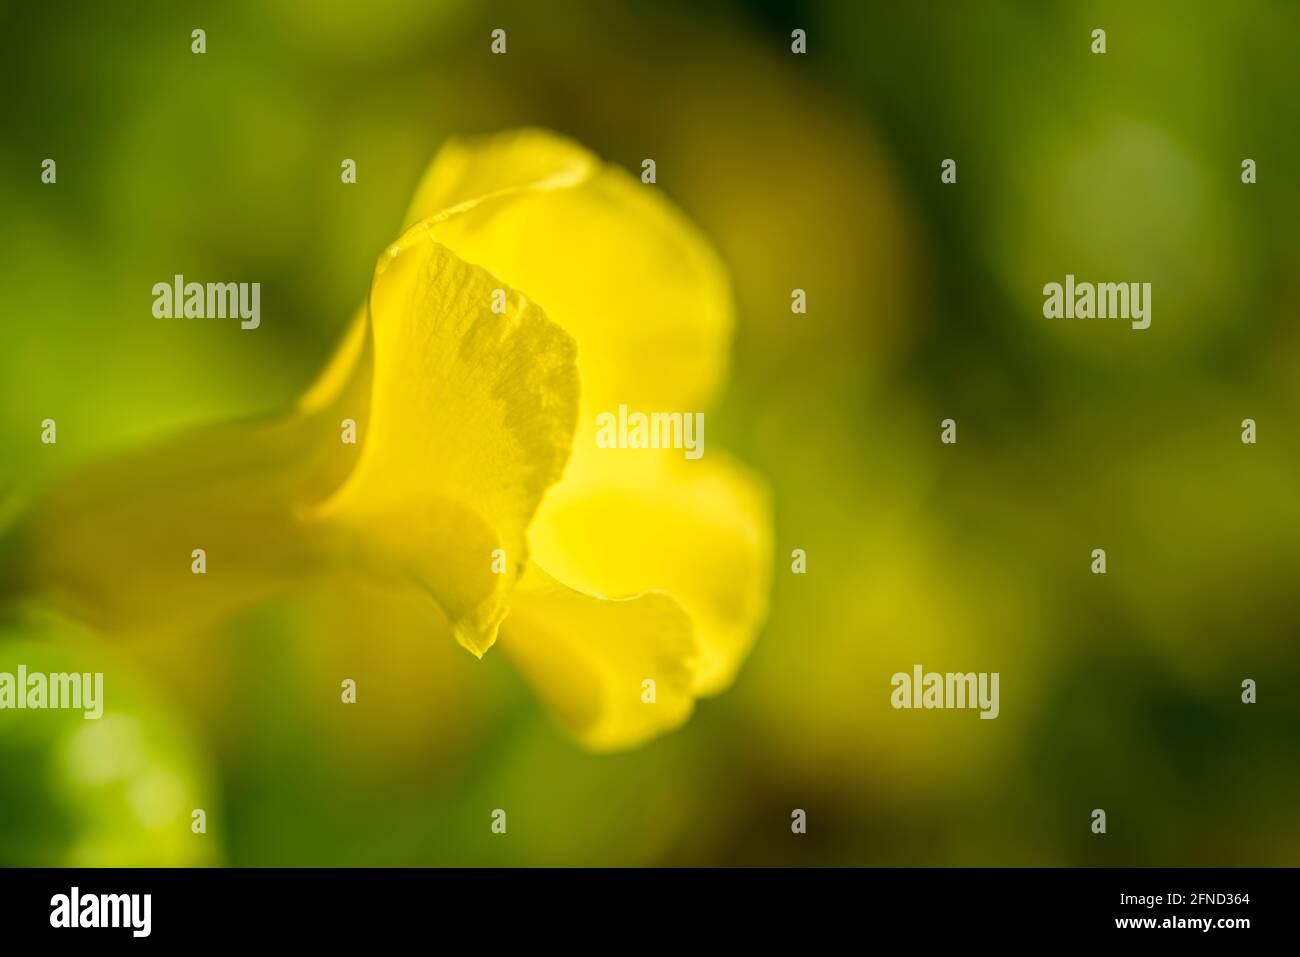 Close-up localized fire (Tecoma Stans), or yellow trumpet flower, a climbing plant that blooms in spring, a shrub native to the American continent. Stock Photo